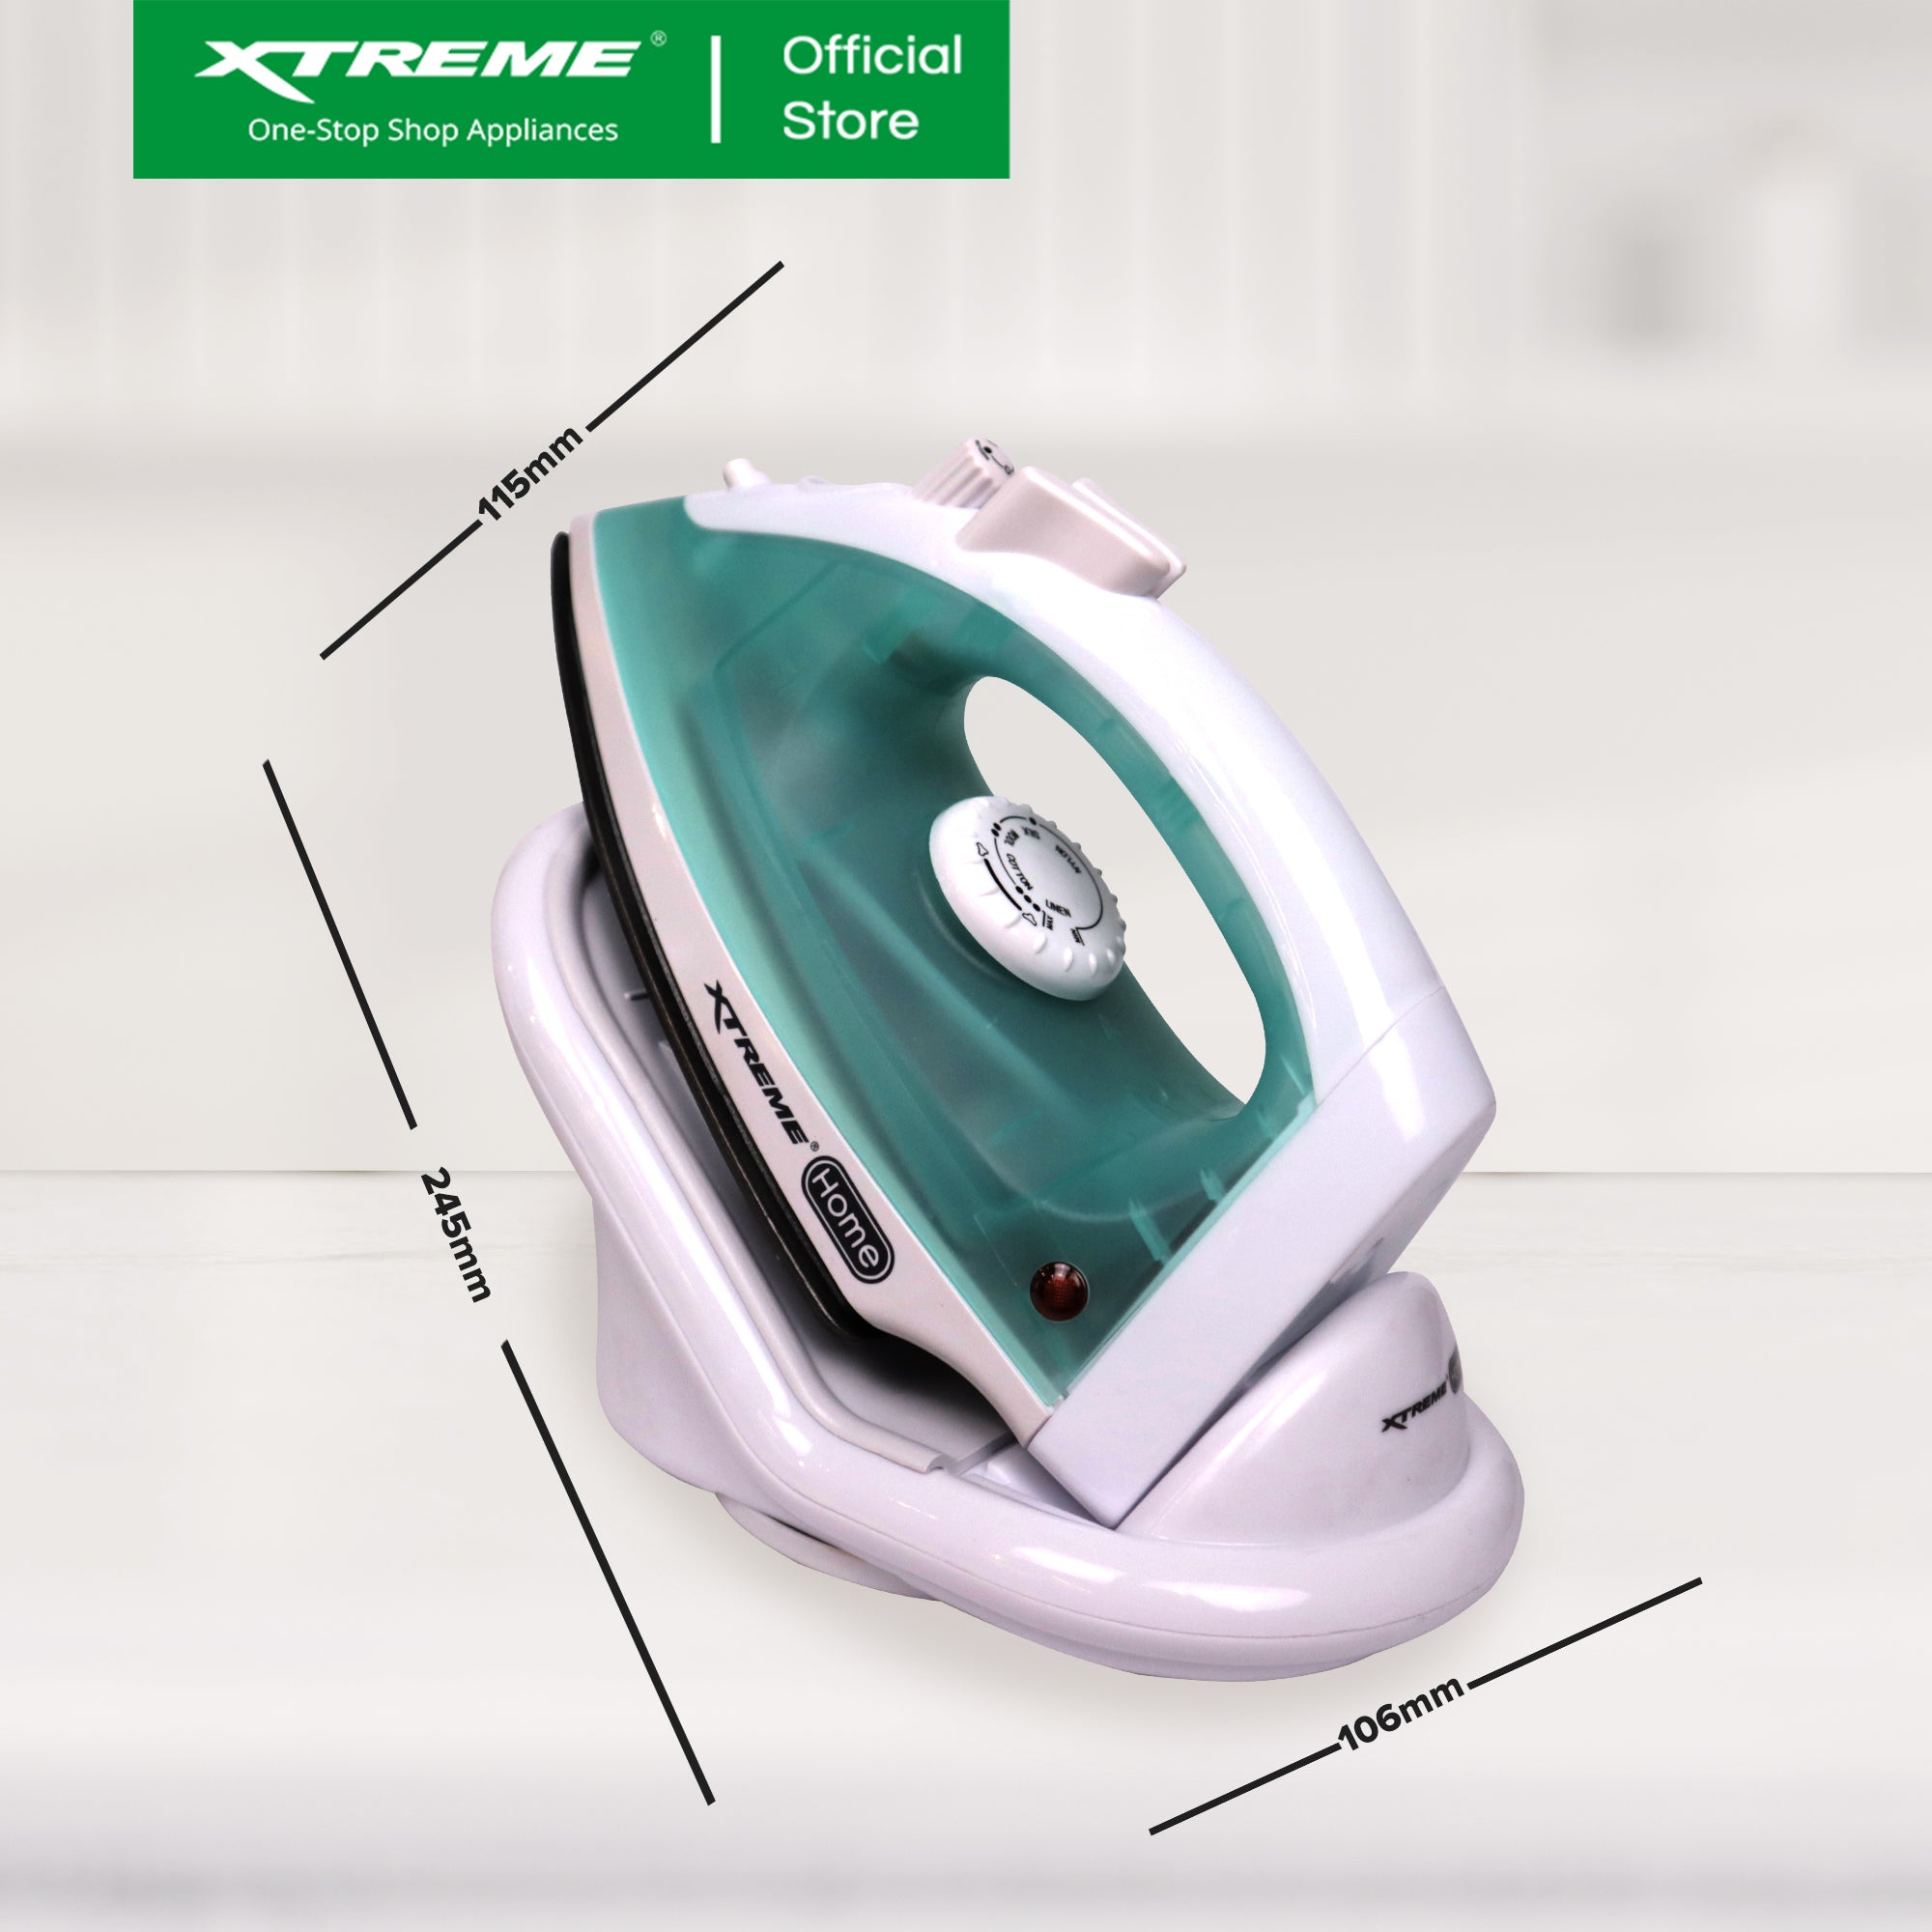 XTREME HOME Cordless Steam Iron with Spray Ceramic Soleplate & Indicator Light (Green) | XH-IRONSTEAMGREEN